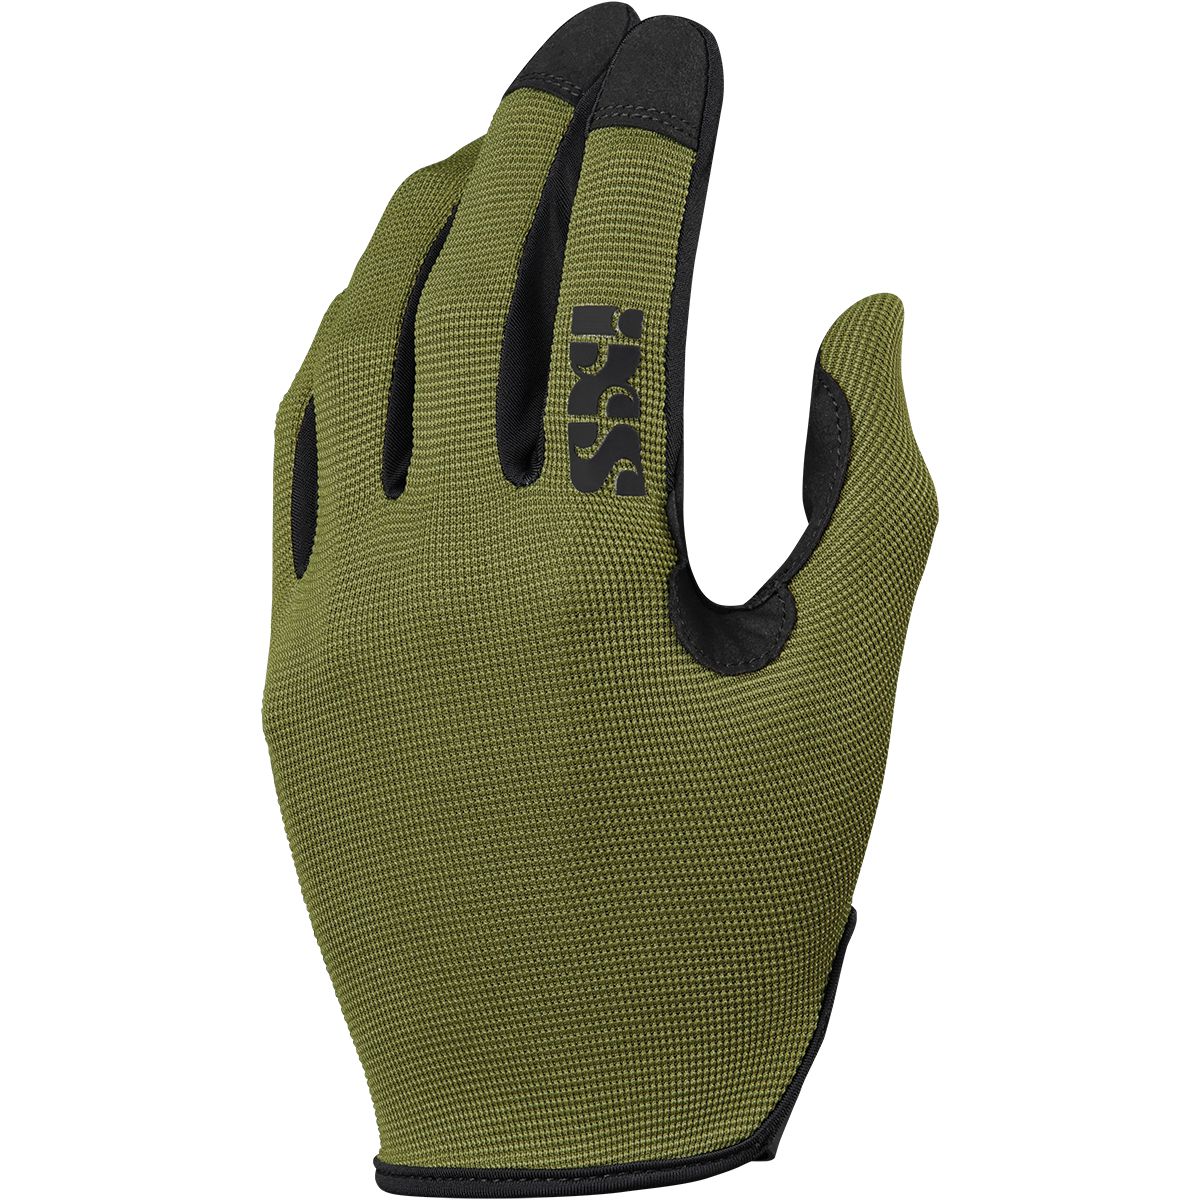 iXS iXS Carve Digger gloves - Gloves - Bicycle Warehouse